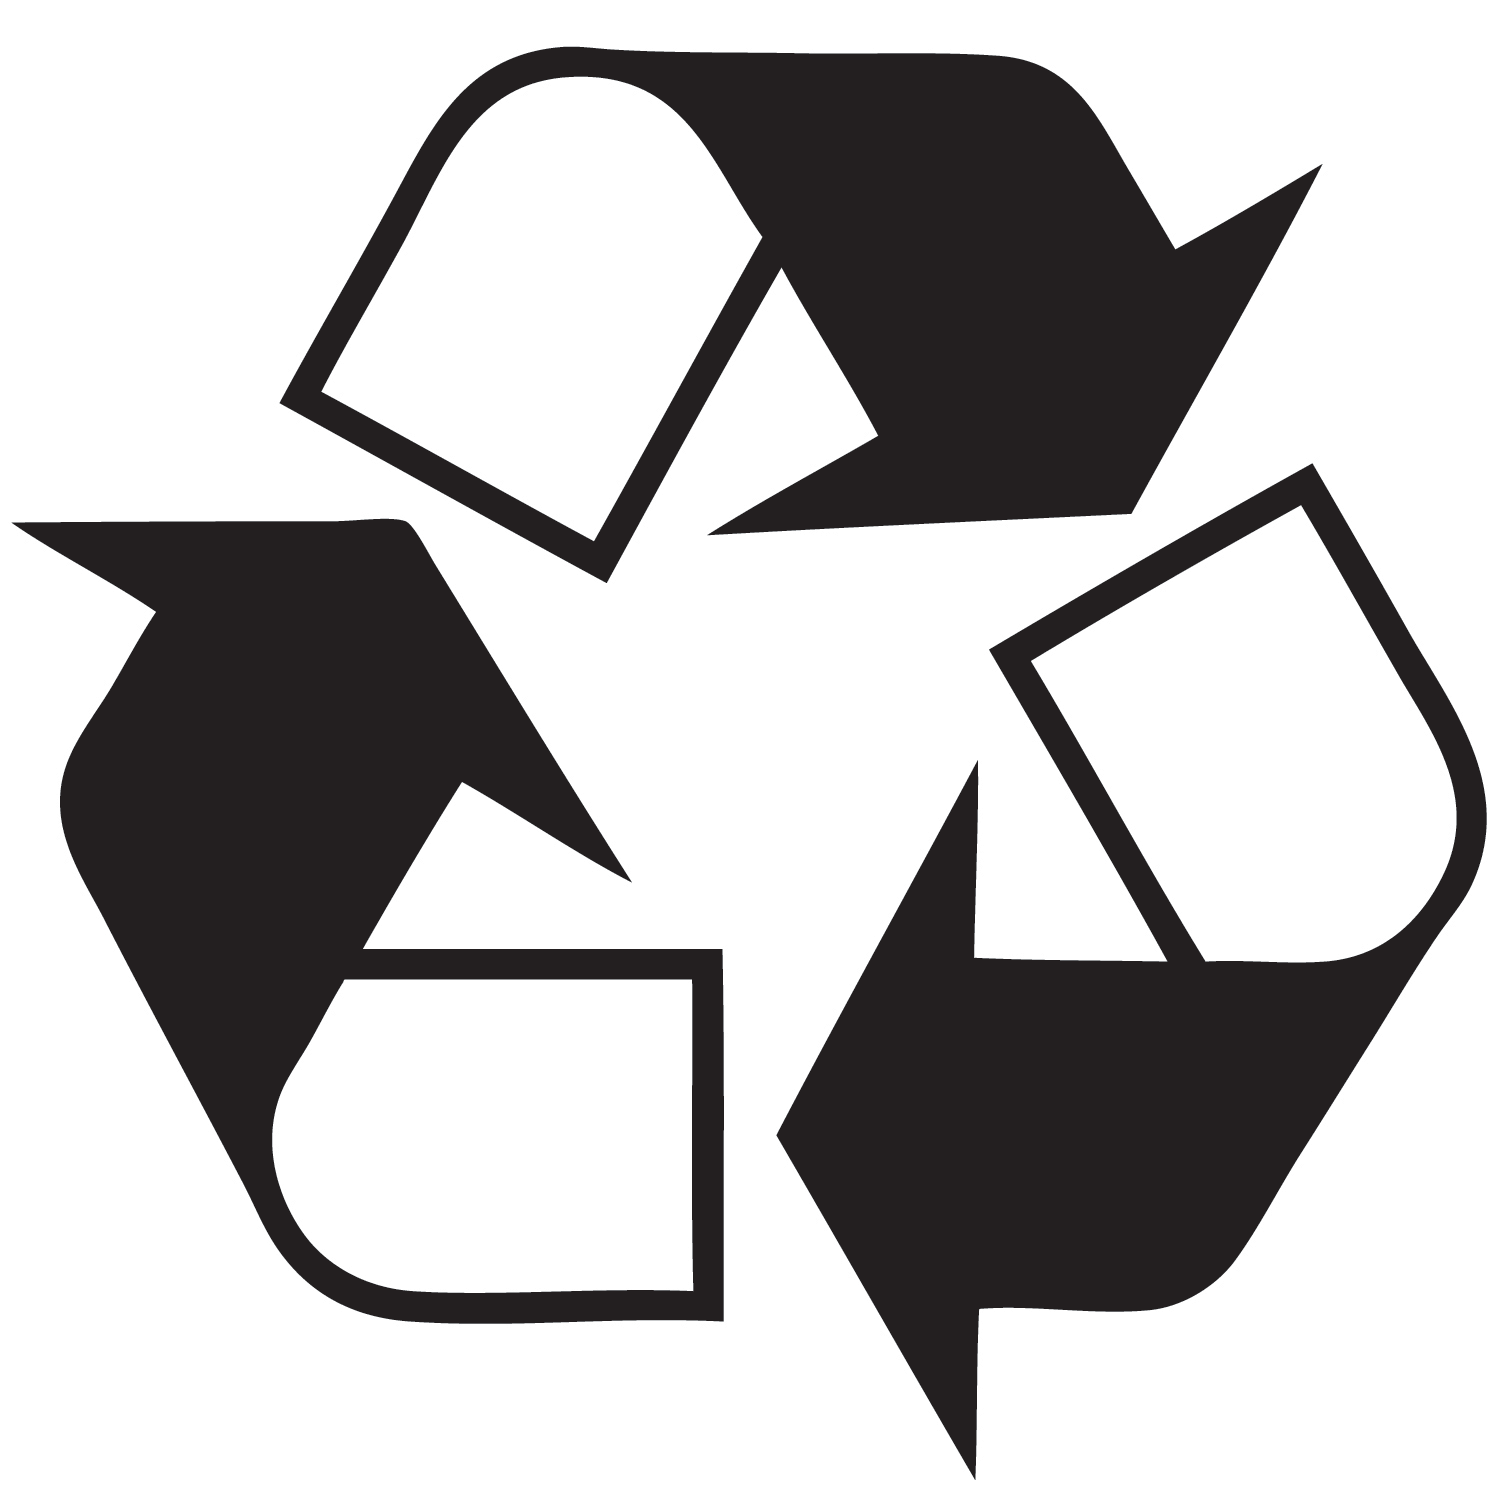 Free Recycle Symbol - ClipArt Best